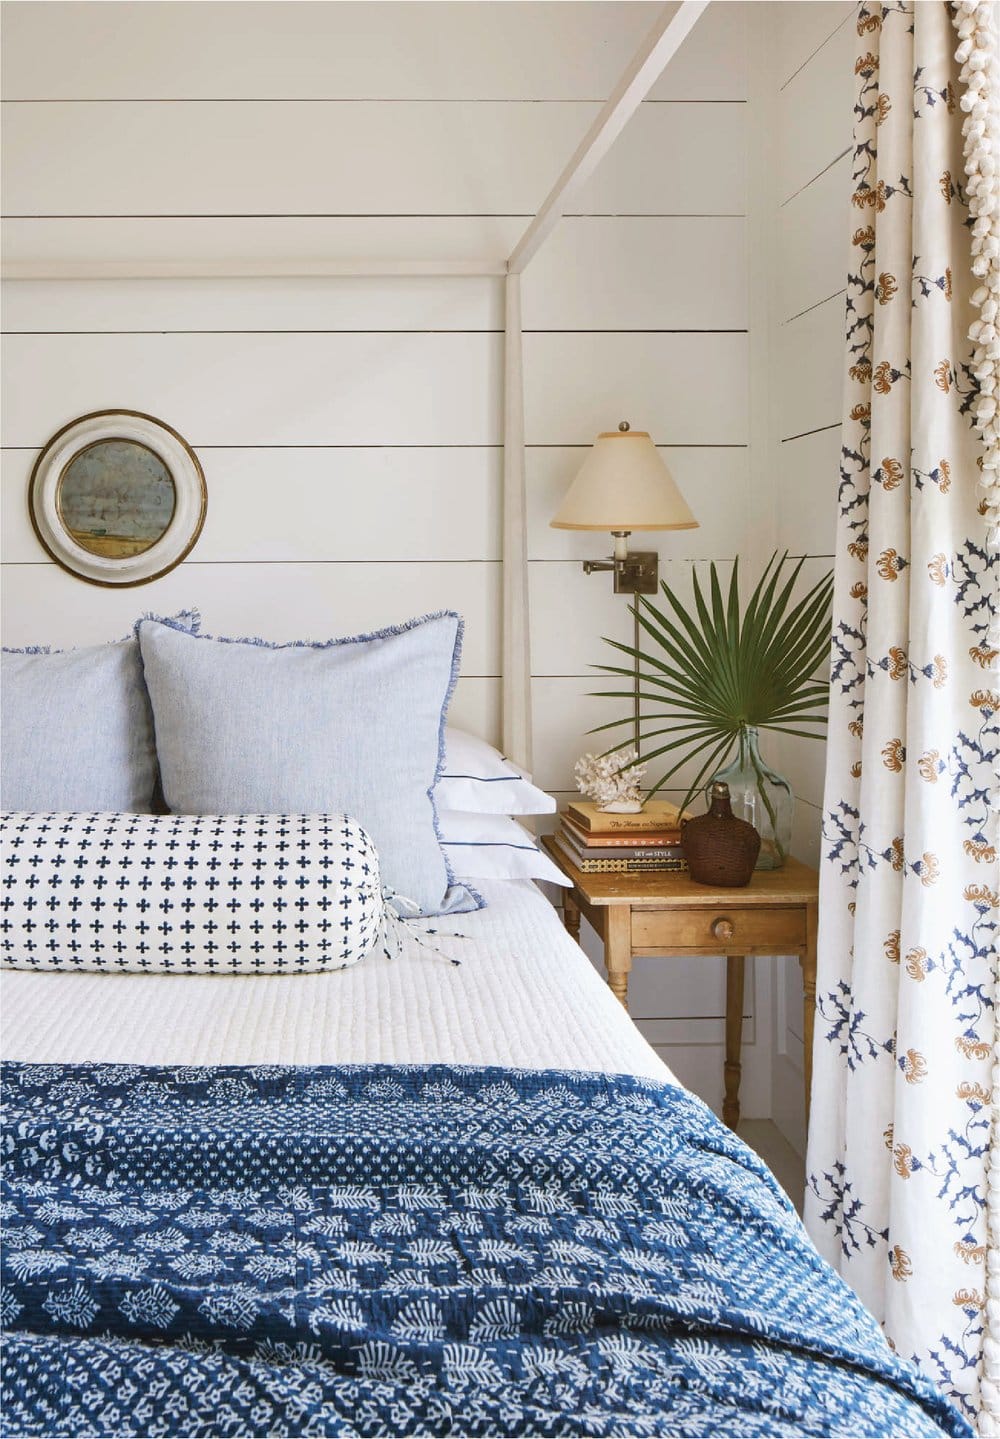 White and blue bedroom with coastal style featured in interiors designed by Heather Chadduck